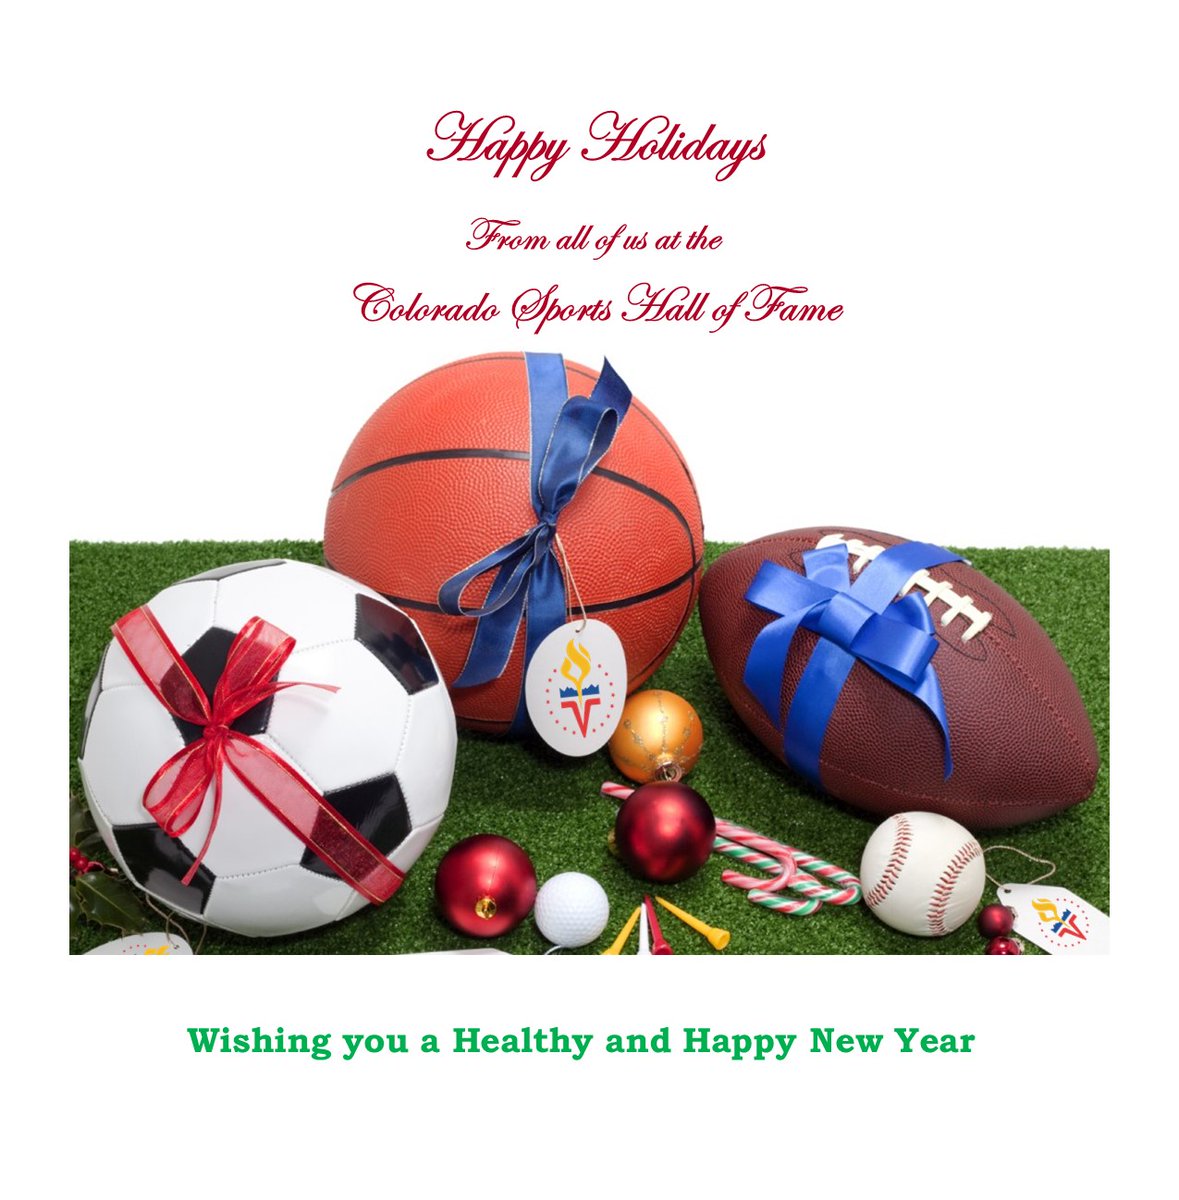 Season's Greetings from the Colorado Sports Hall of Fame!